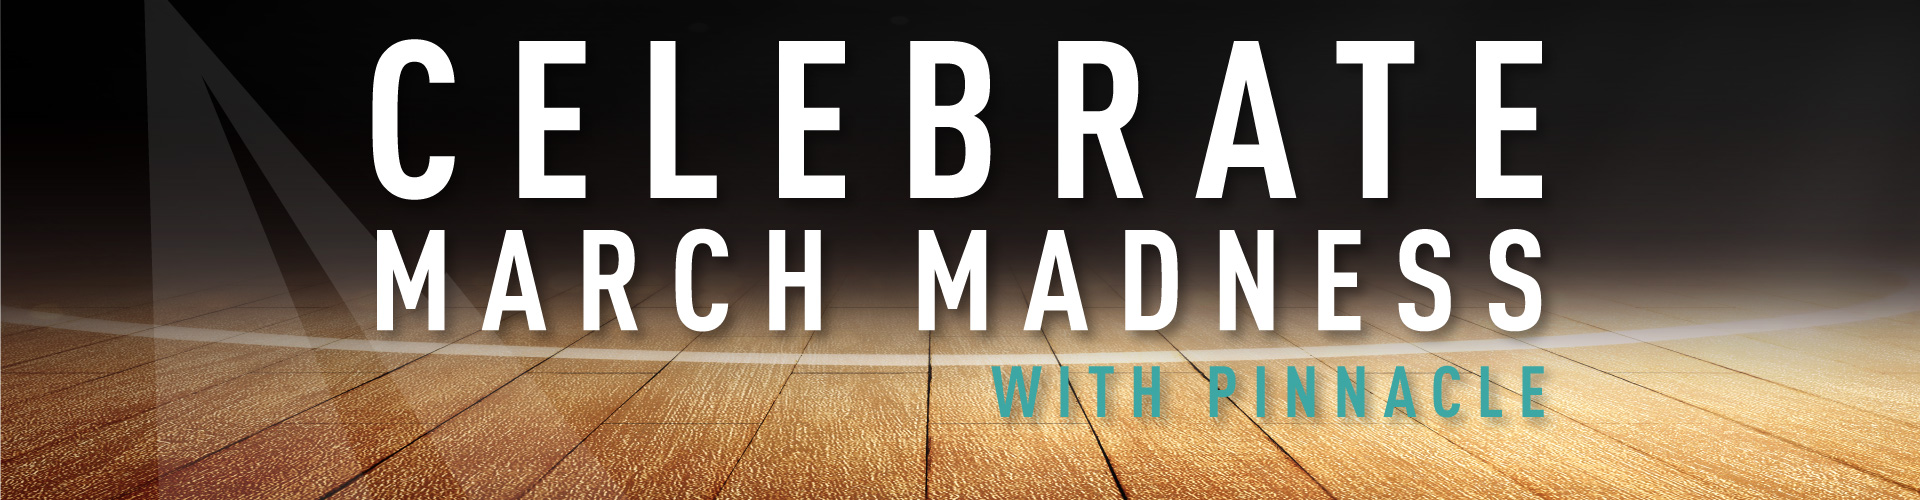 Celebrate March Madness With Pinnacle Online Banner